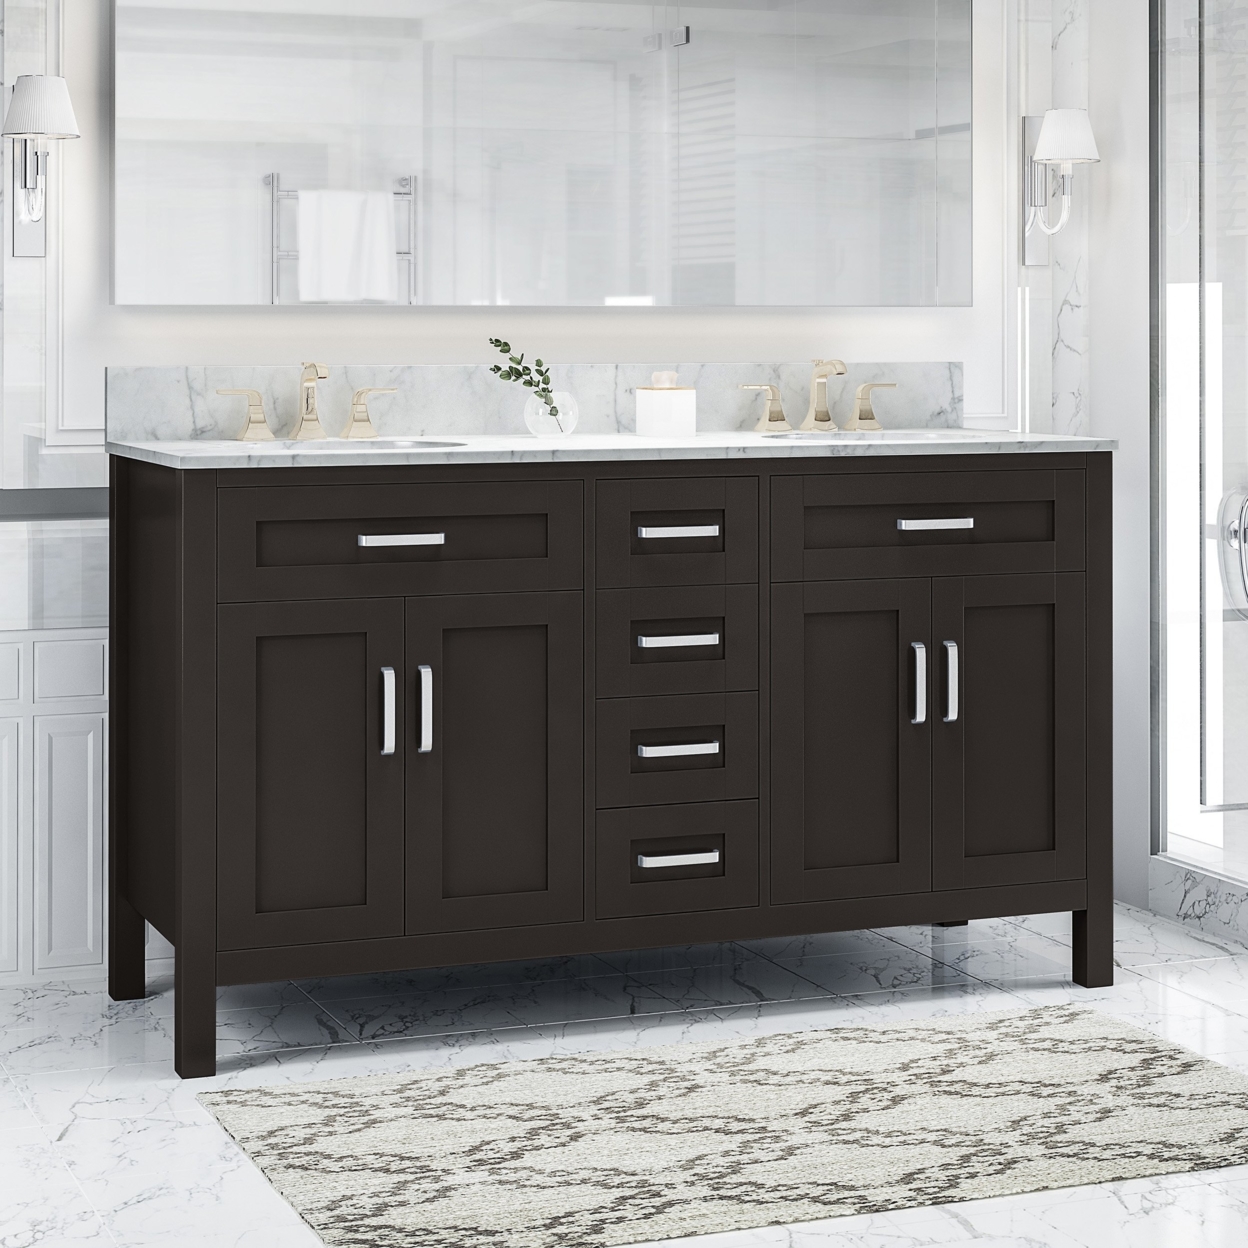 Greeley Contemporary 60 Wood Bathroom Vanity (Counter Top Not Included) - Gray